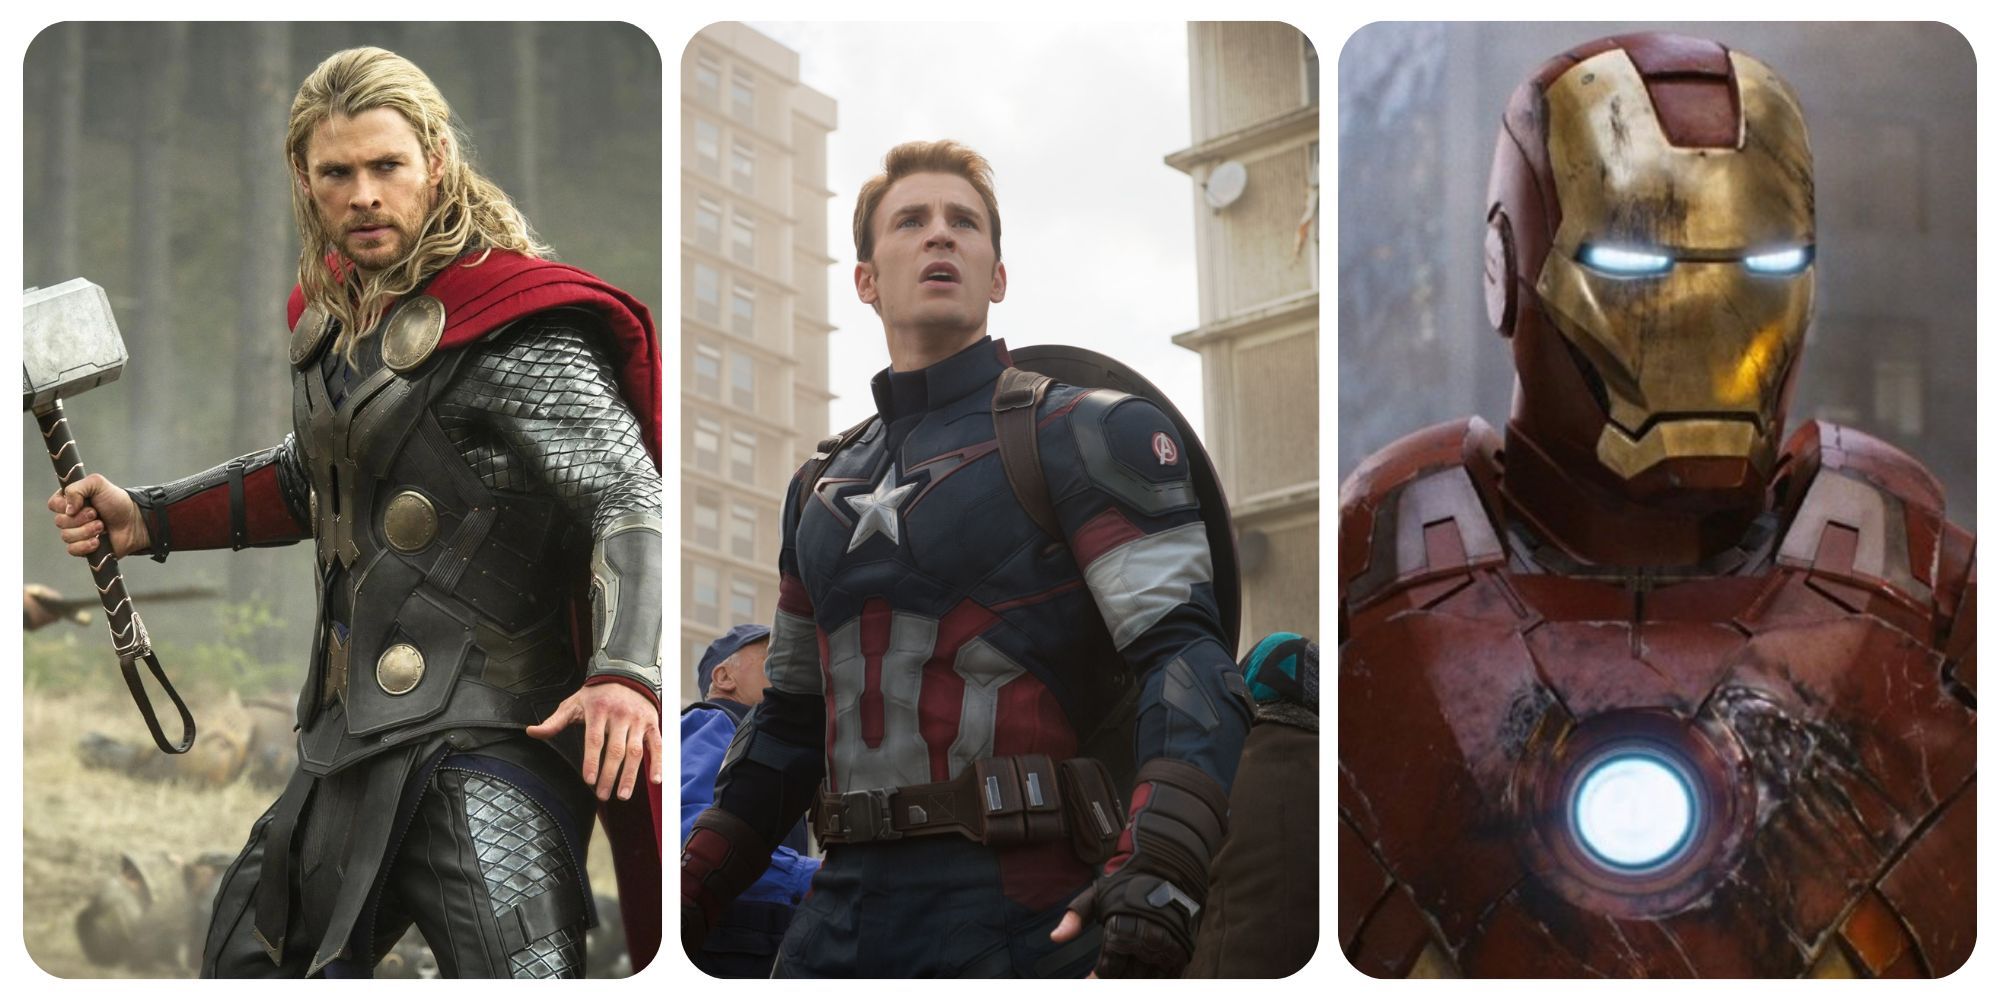 Split image Thor wielding hammer, Captain America in surprise and armored Iron Man